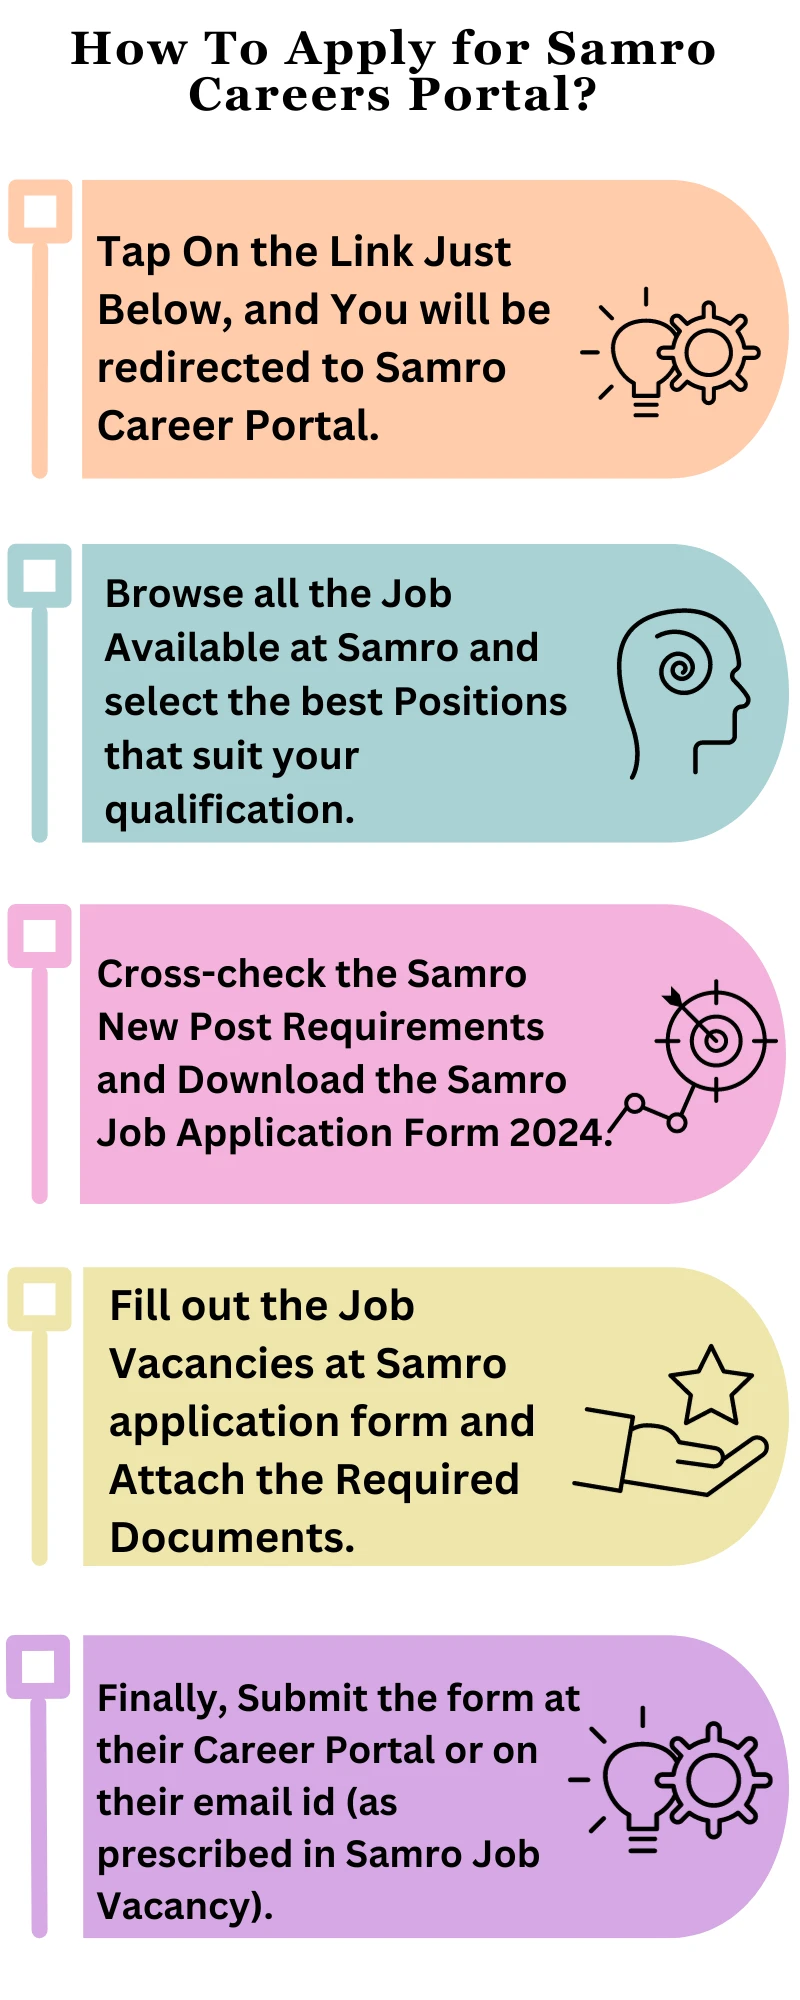 How To Apply for Samro Careers Portal?